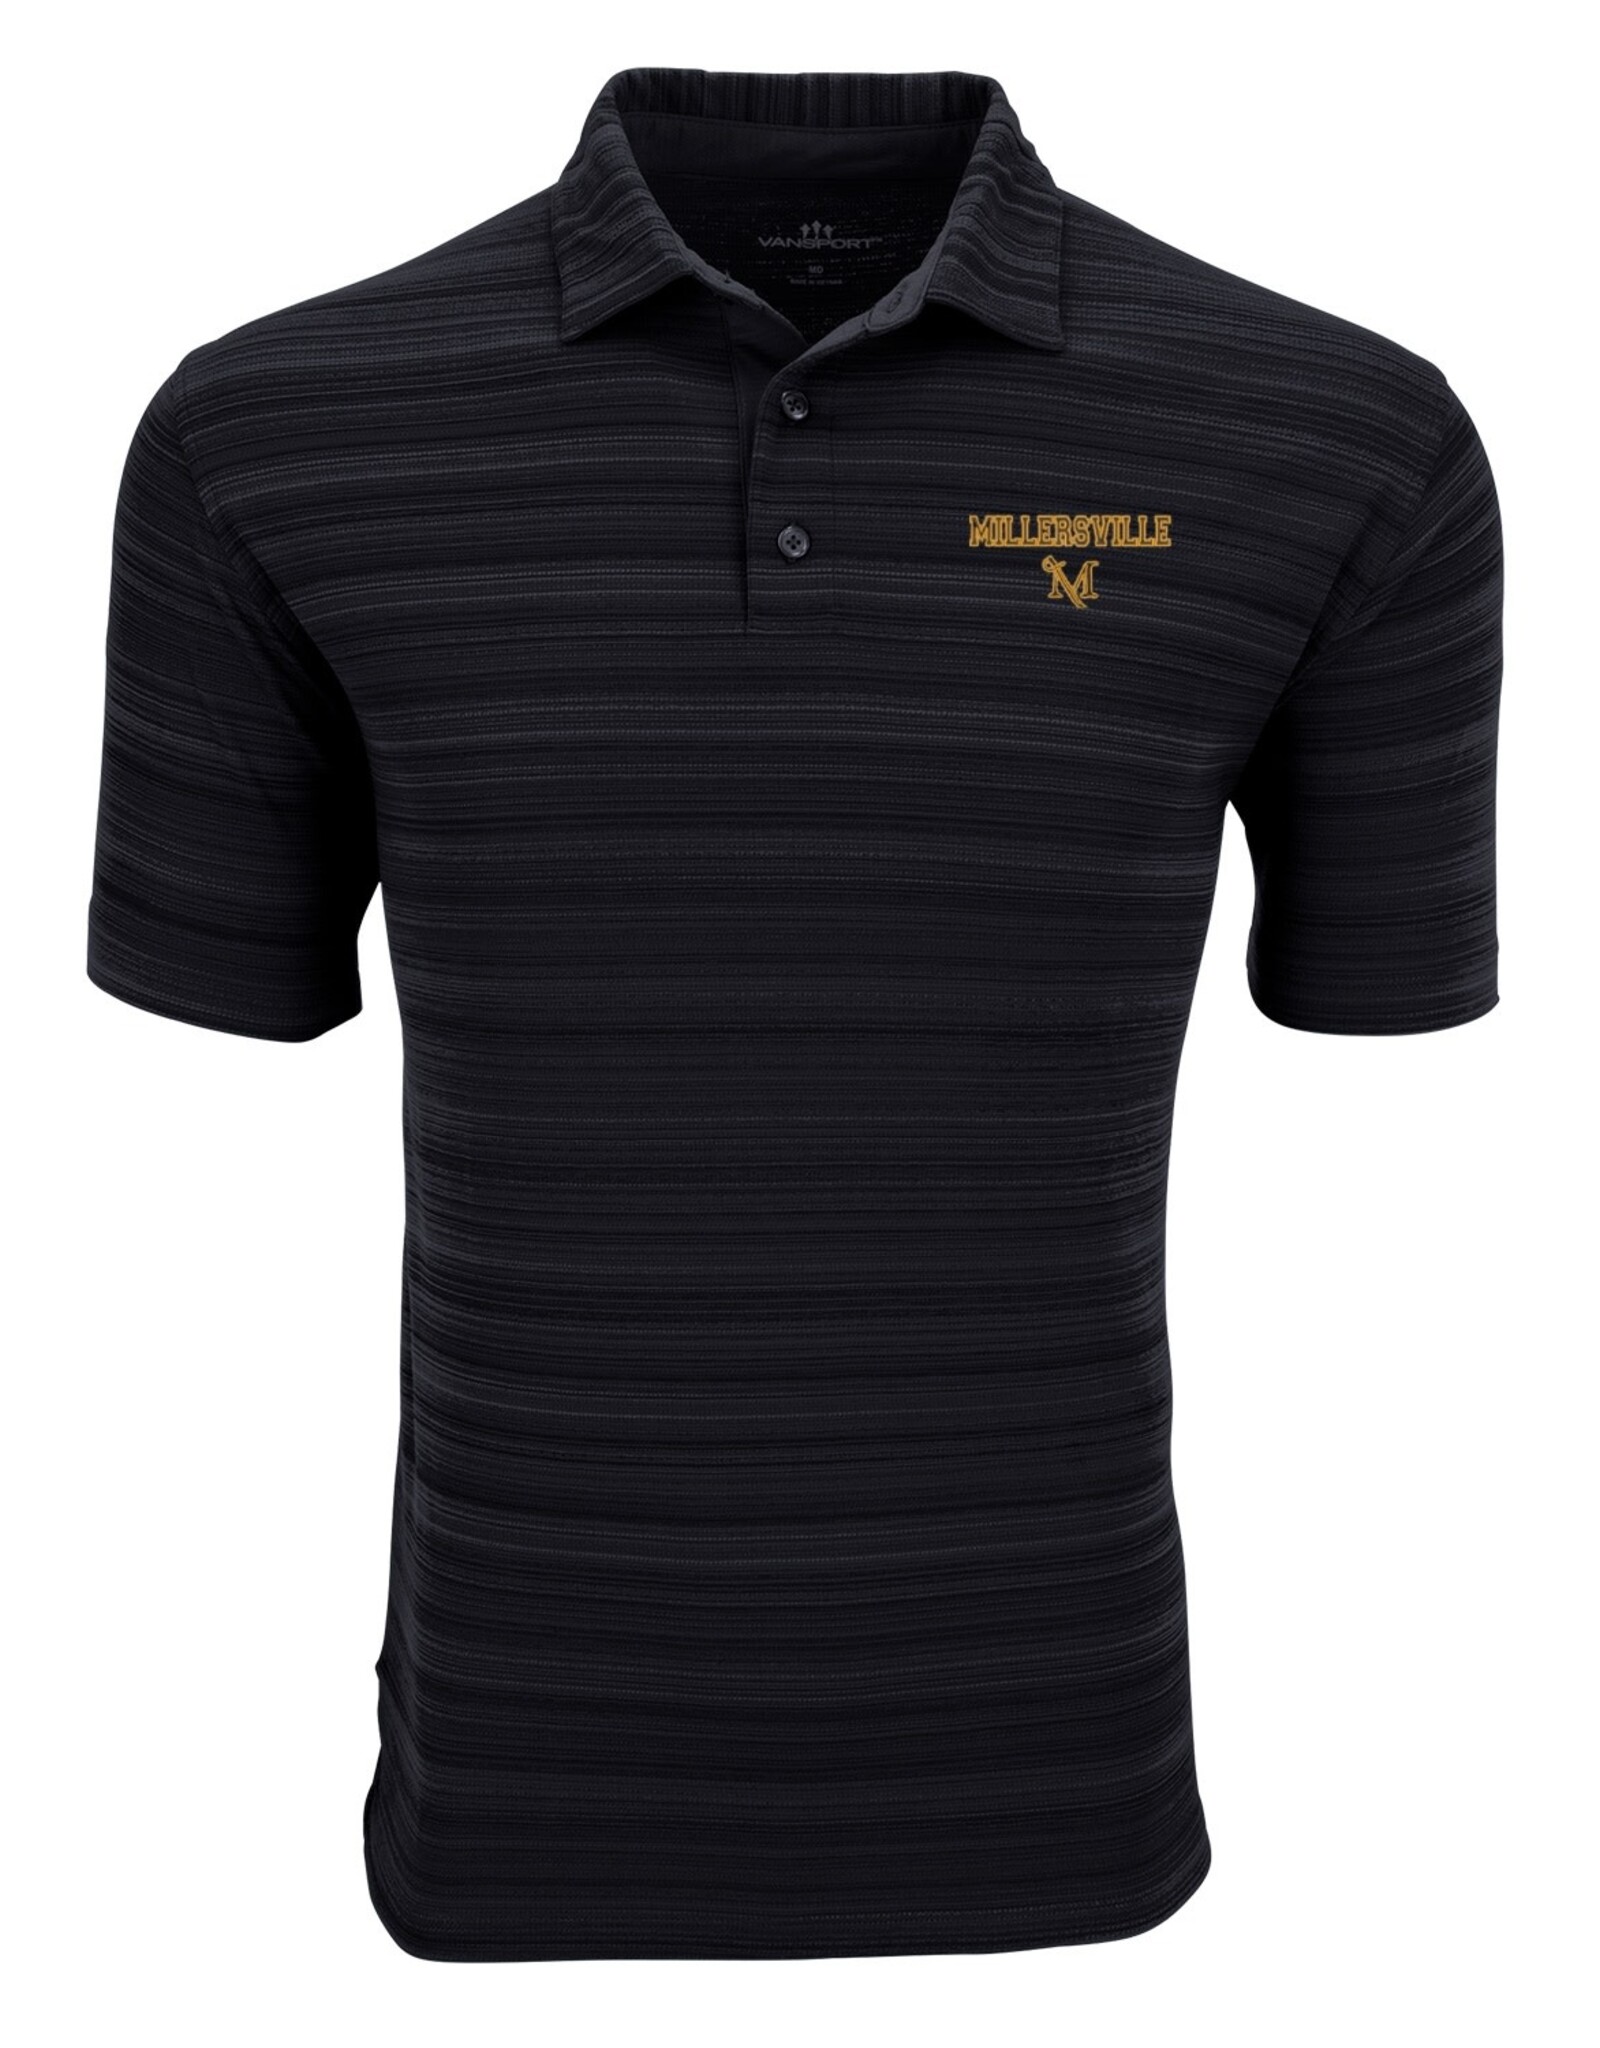 Strata Polo Black with Millersville over M-Sword